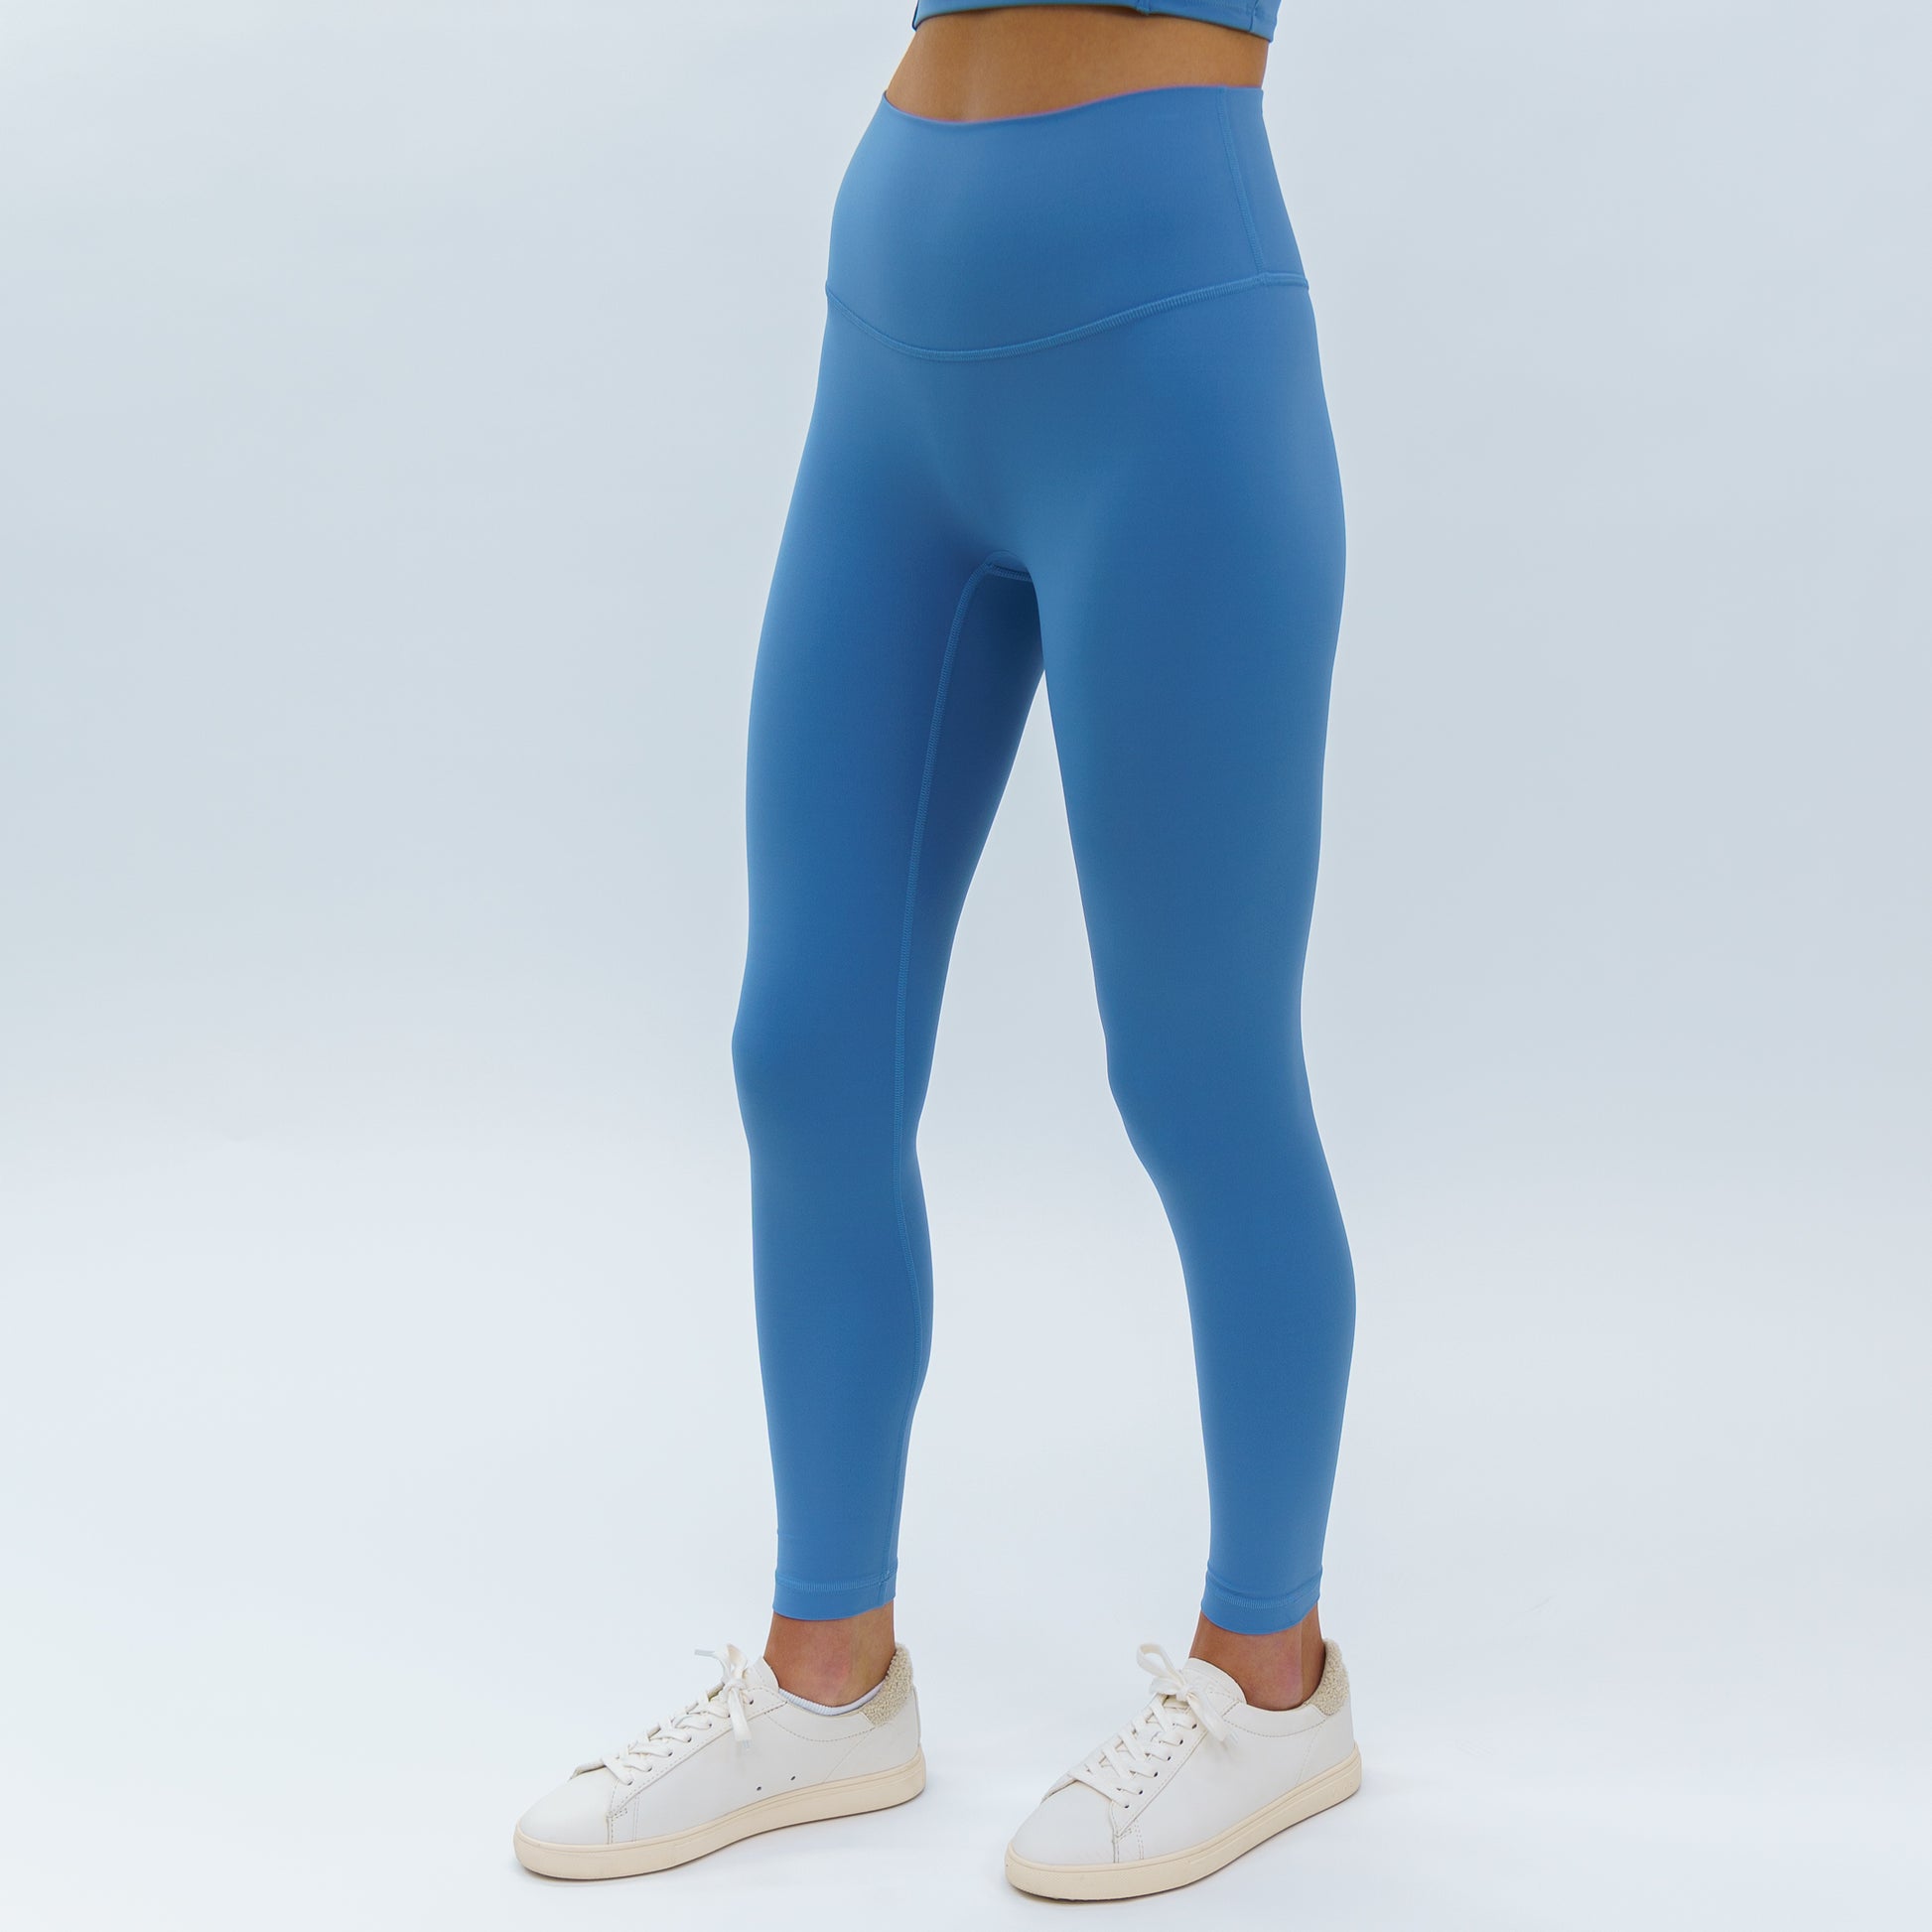 Sky Blue And Cotton Ladies Legging, Size: Medium And Large at Rs